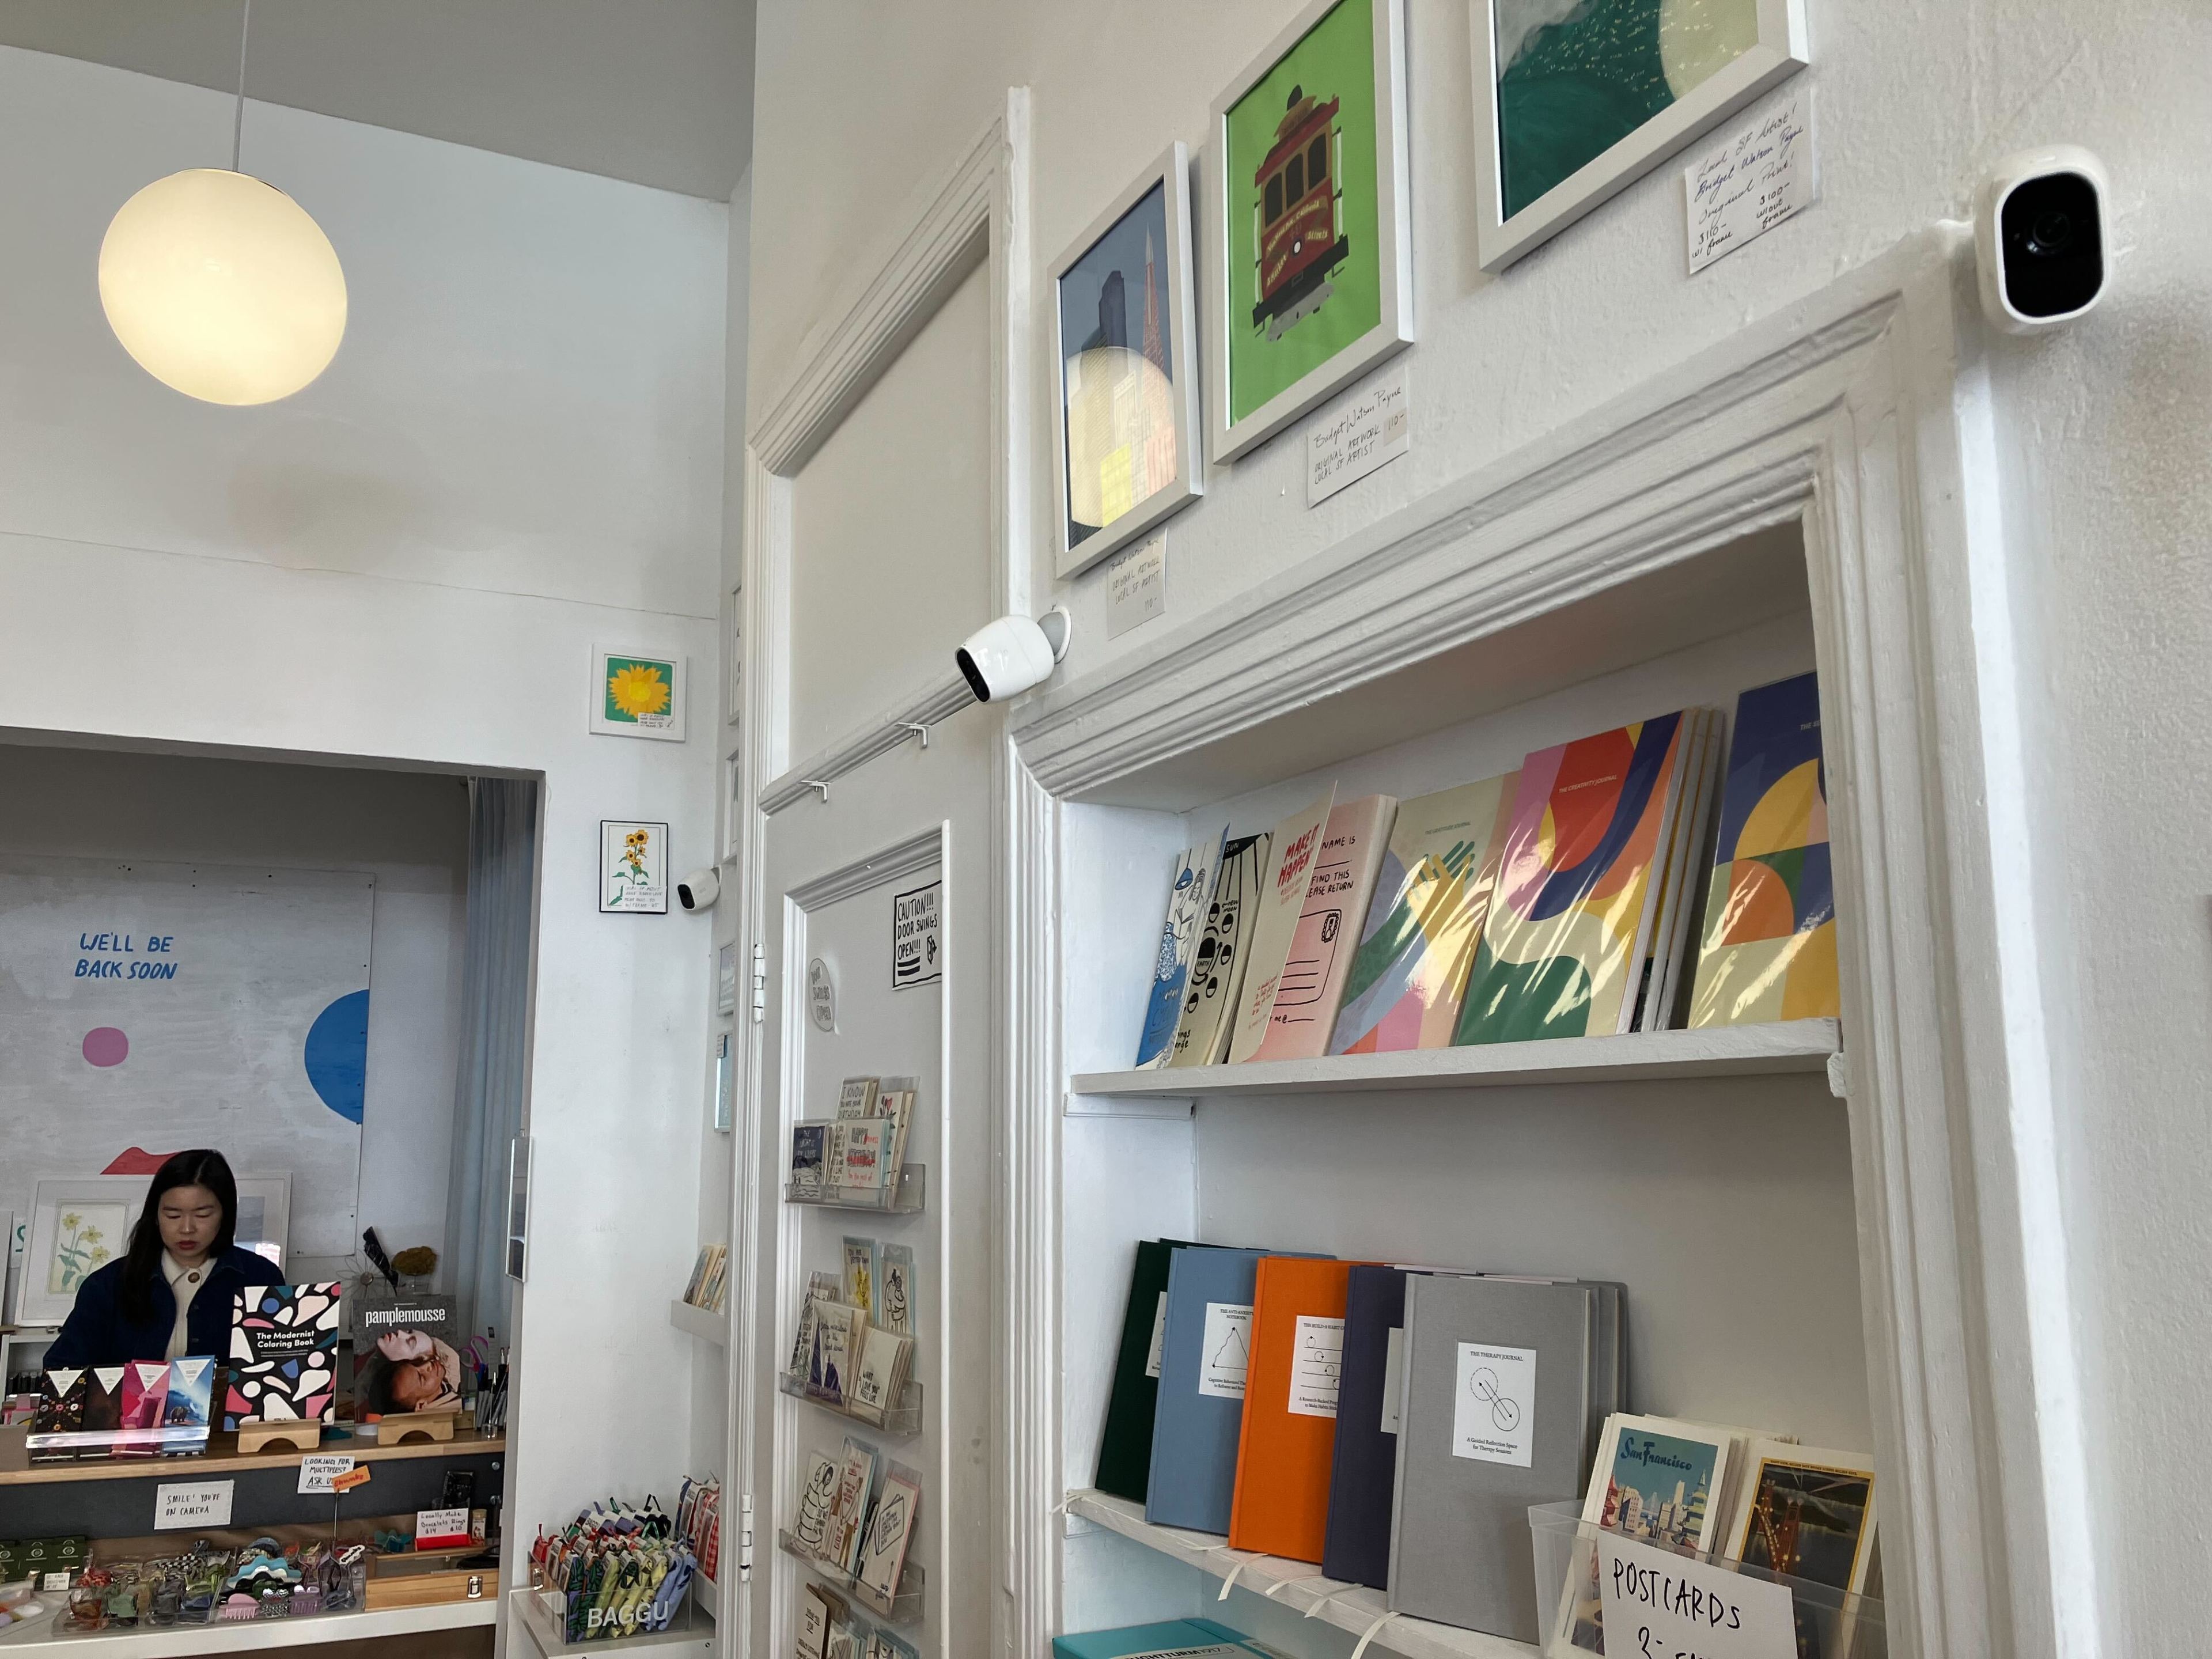 An art shop interior with prints, greeting cards on shelves, a white pendant light, and an attendant behind the counter.